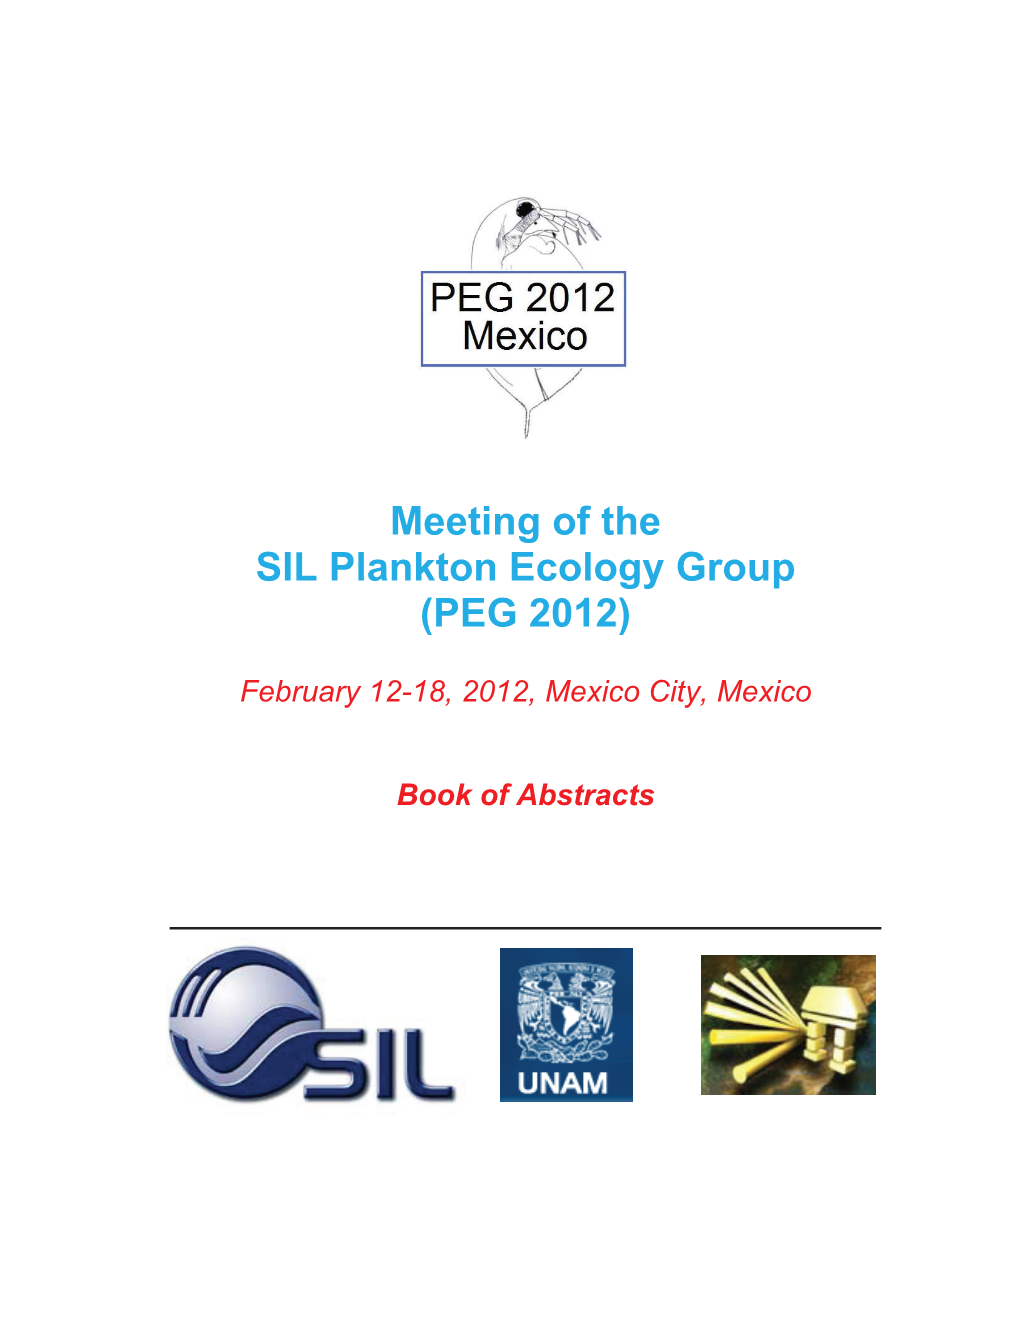 Meeting of the SIL Plankton Ecology Group (PEG 2012)